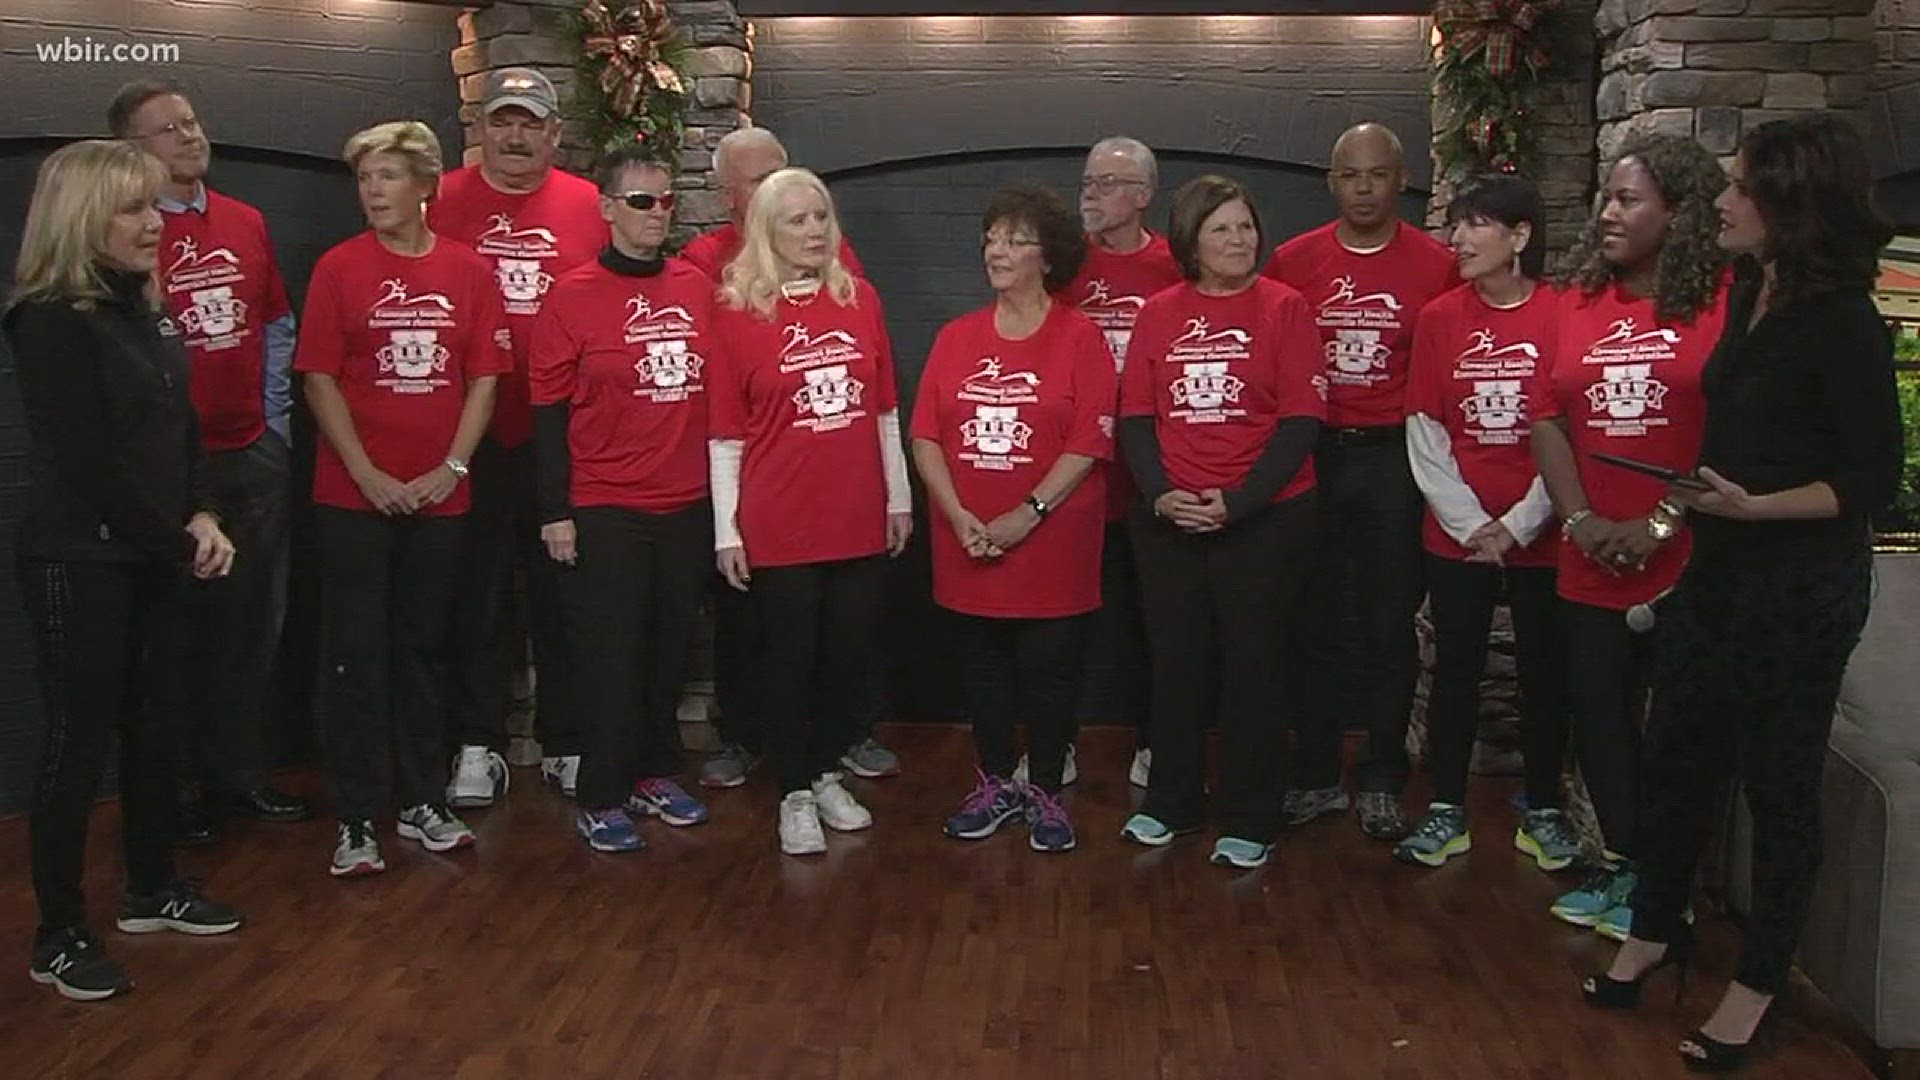 Meet the members of the 2018 Covenant Health Knoxville Marathon. All are ready to start training for the Knoxville and all are over the age of 50.
December 8, 2017-4pm